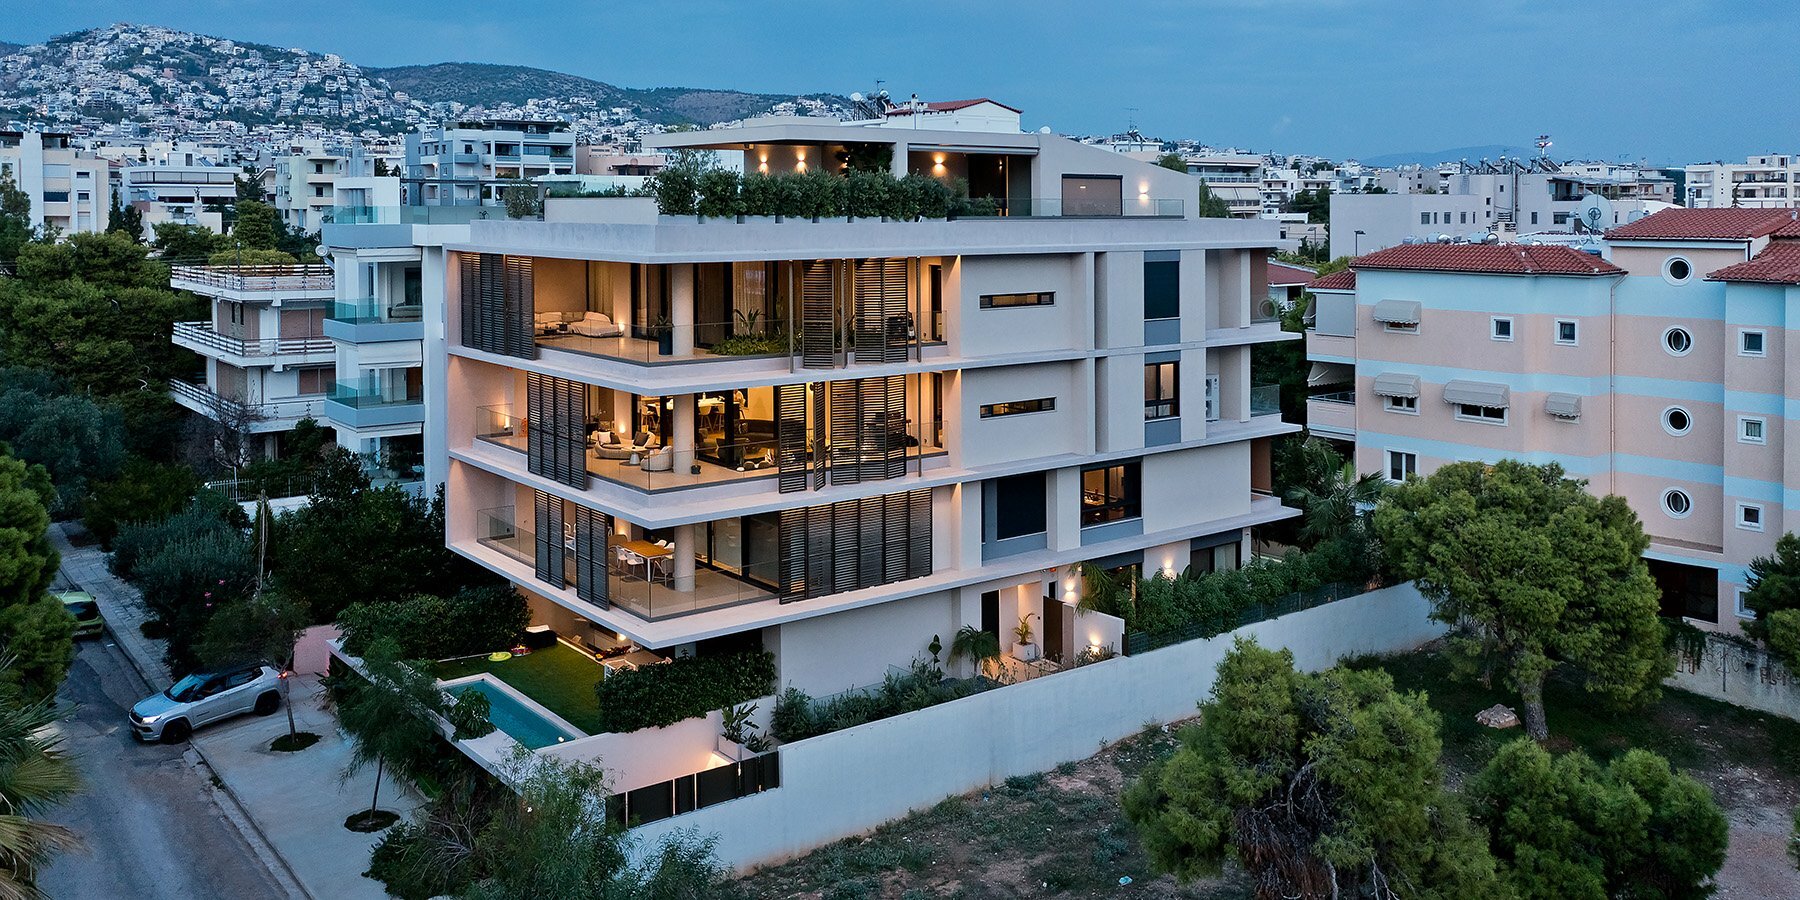 residential-complex-voula-athens-free-architects-micromega-designboom-1800-3